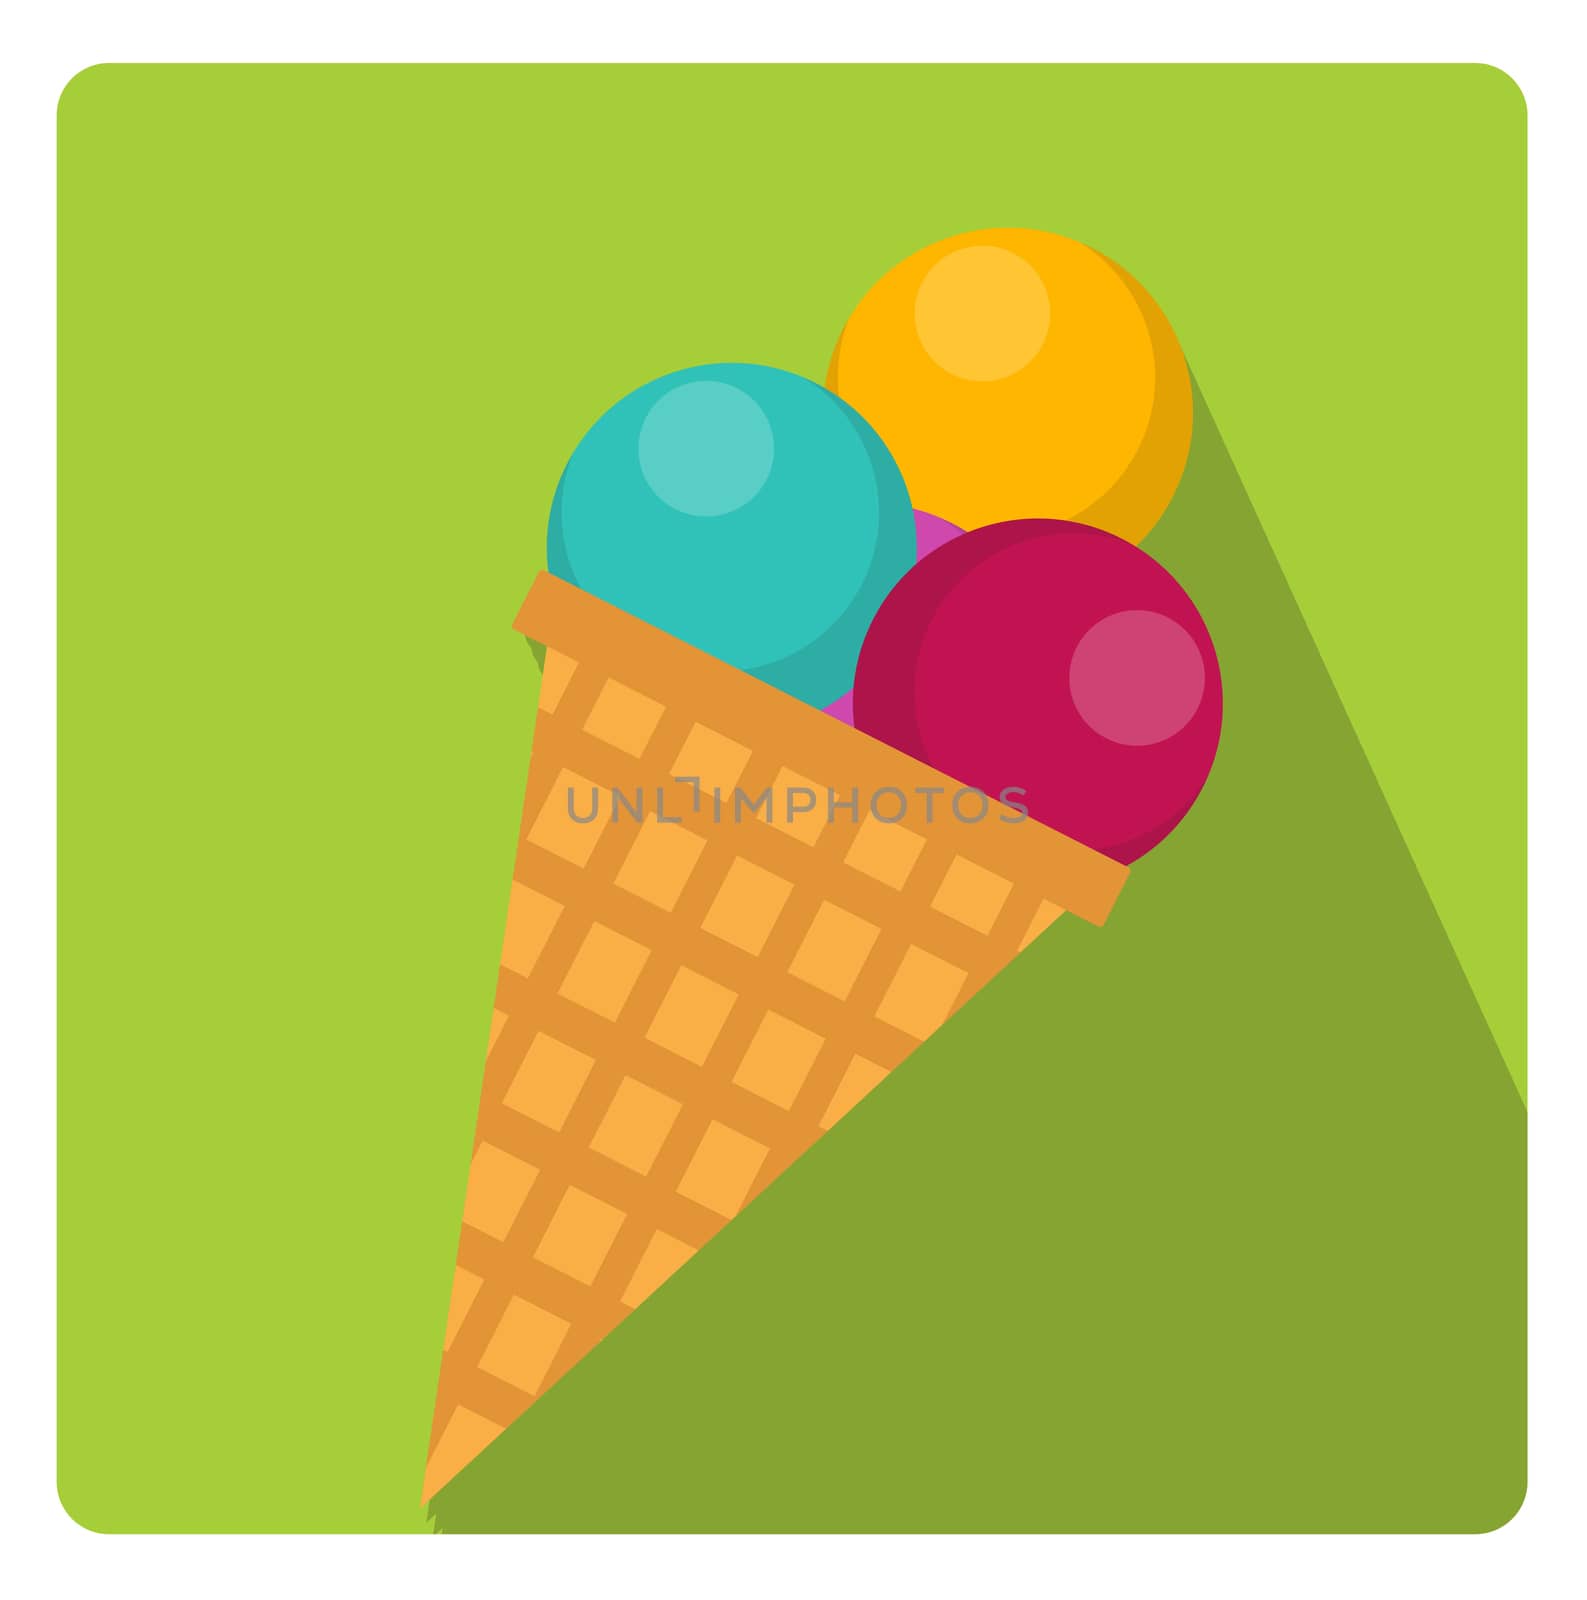 Ice cream cone icon flat style with long shadows, isolated on white background. illustration